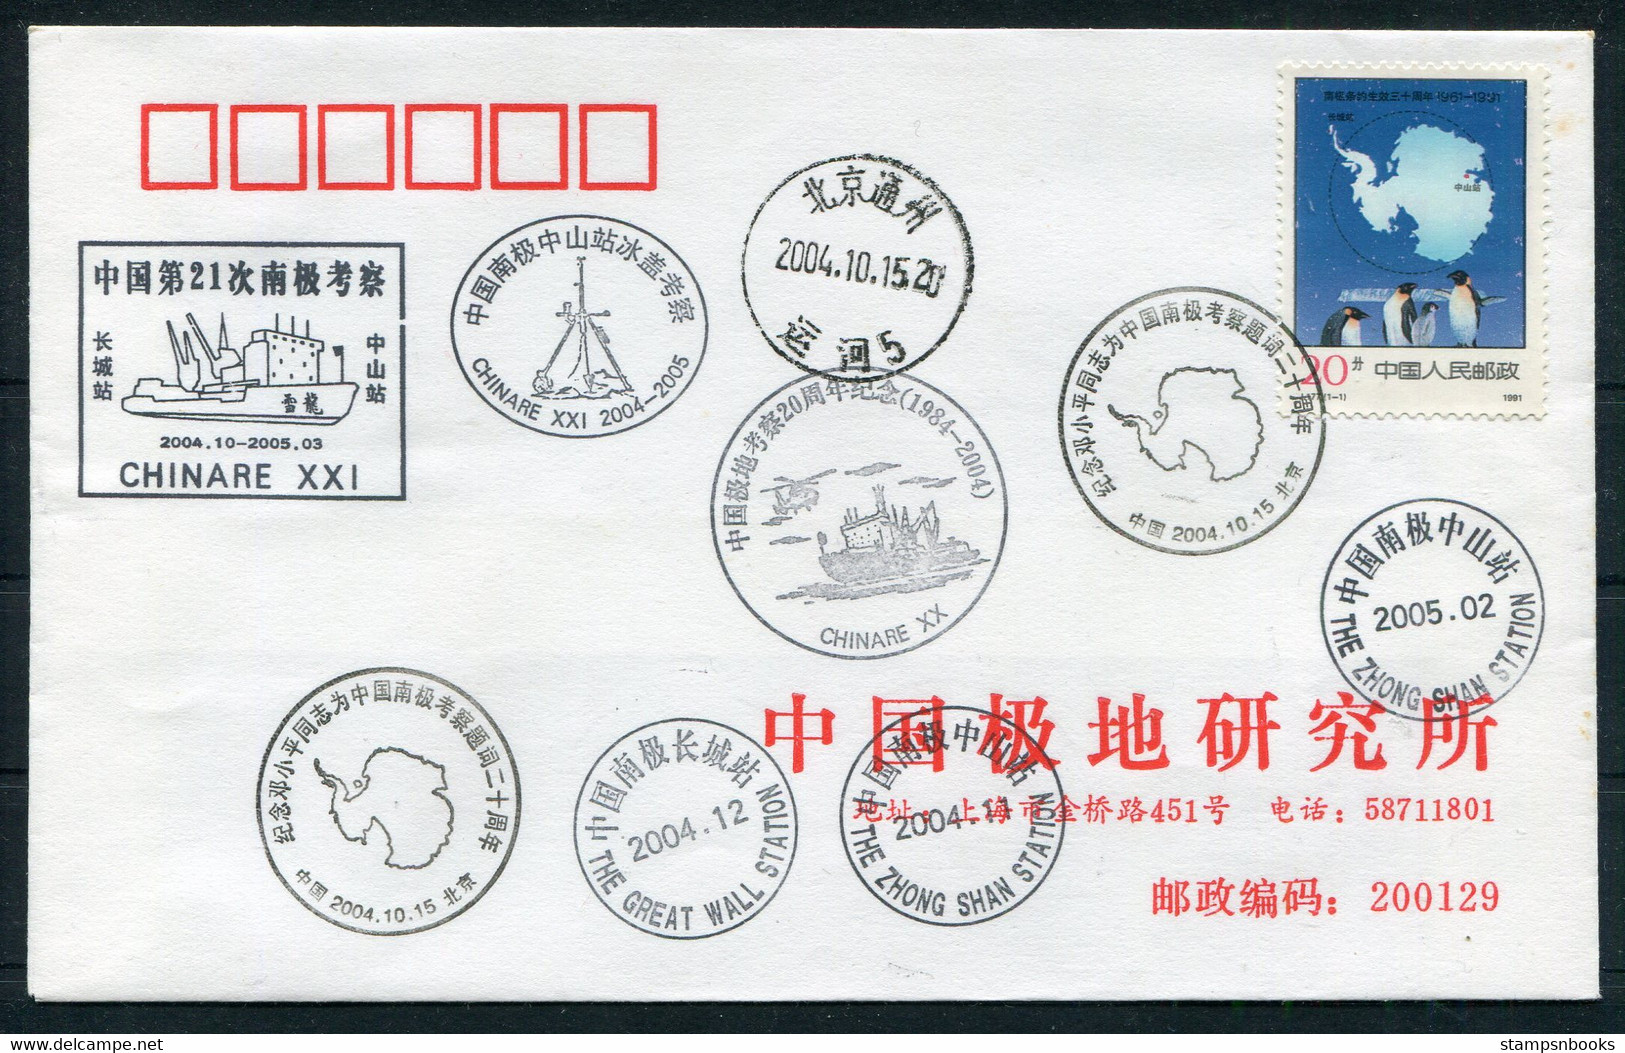 2004-5 China Antarctica CHINARE 21 Expedition, Great Wall Station + Zhong Shan Station, Penguin Cover - Storia Postale